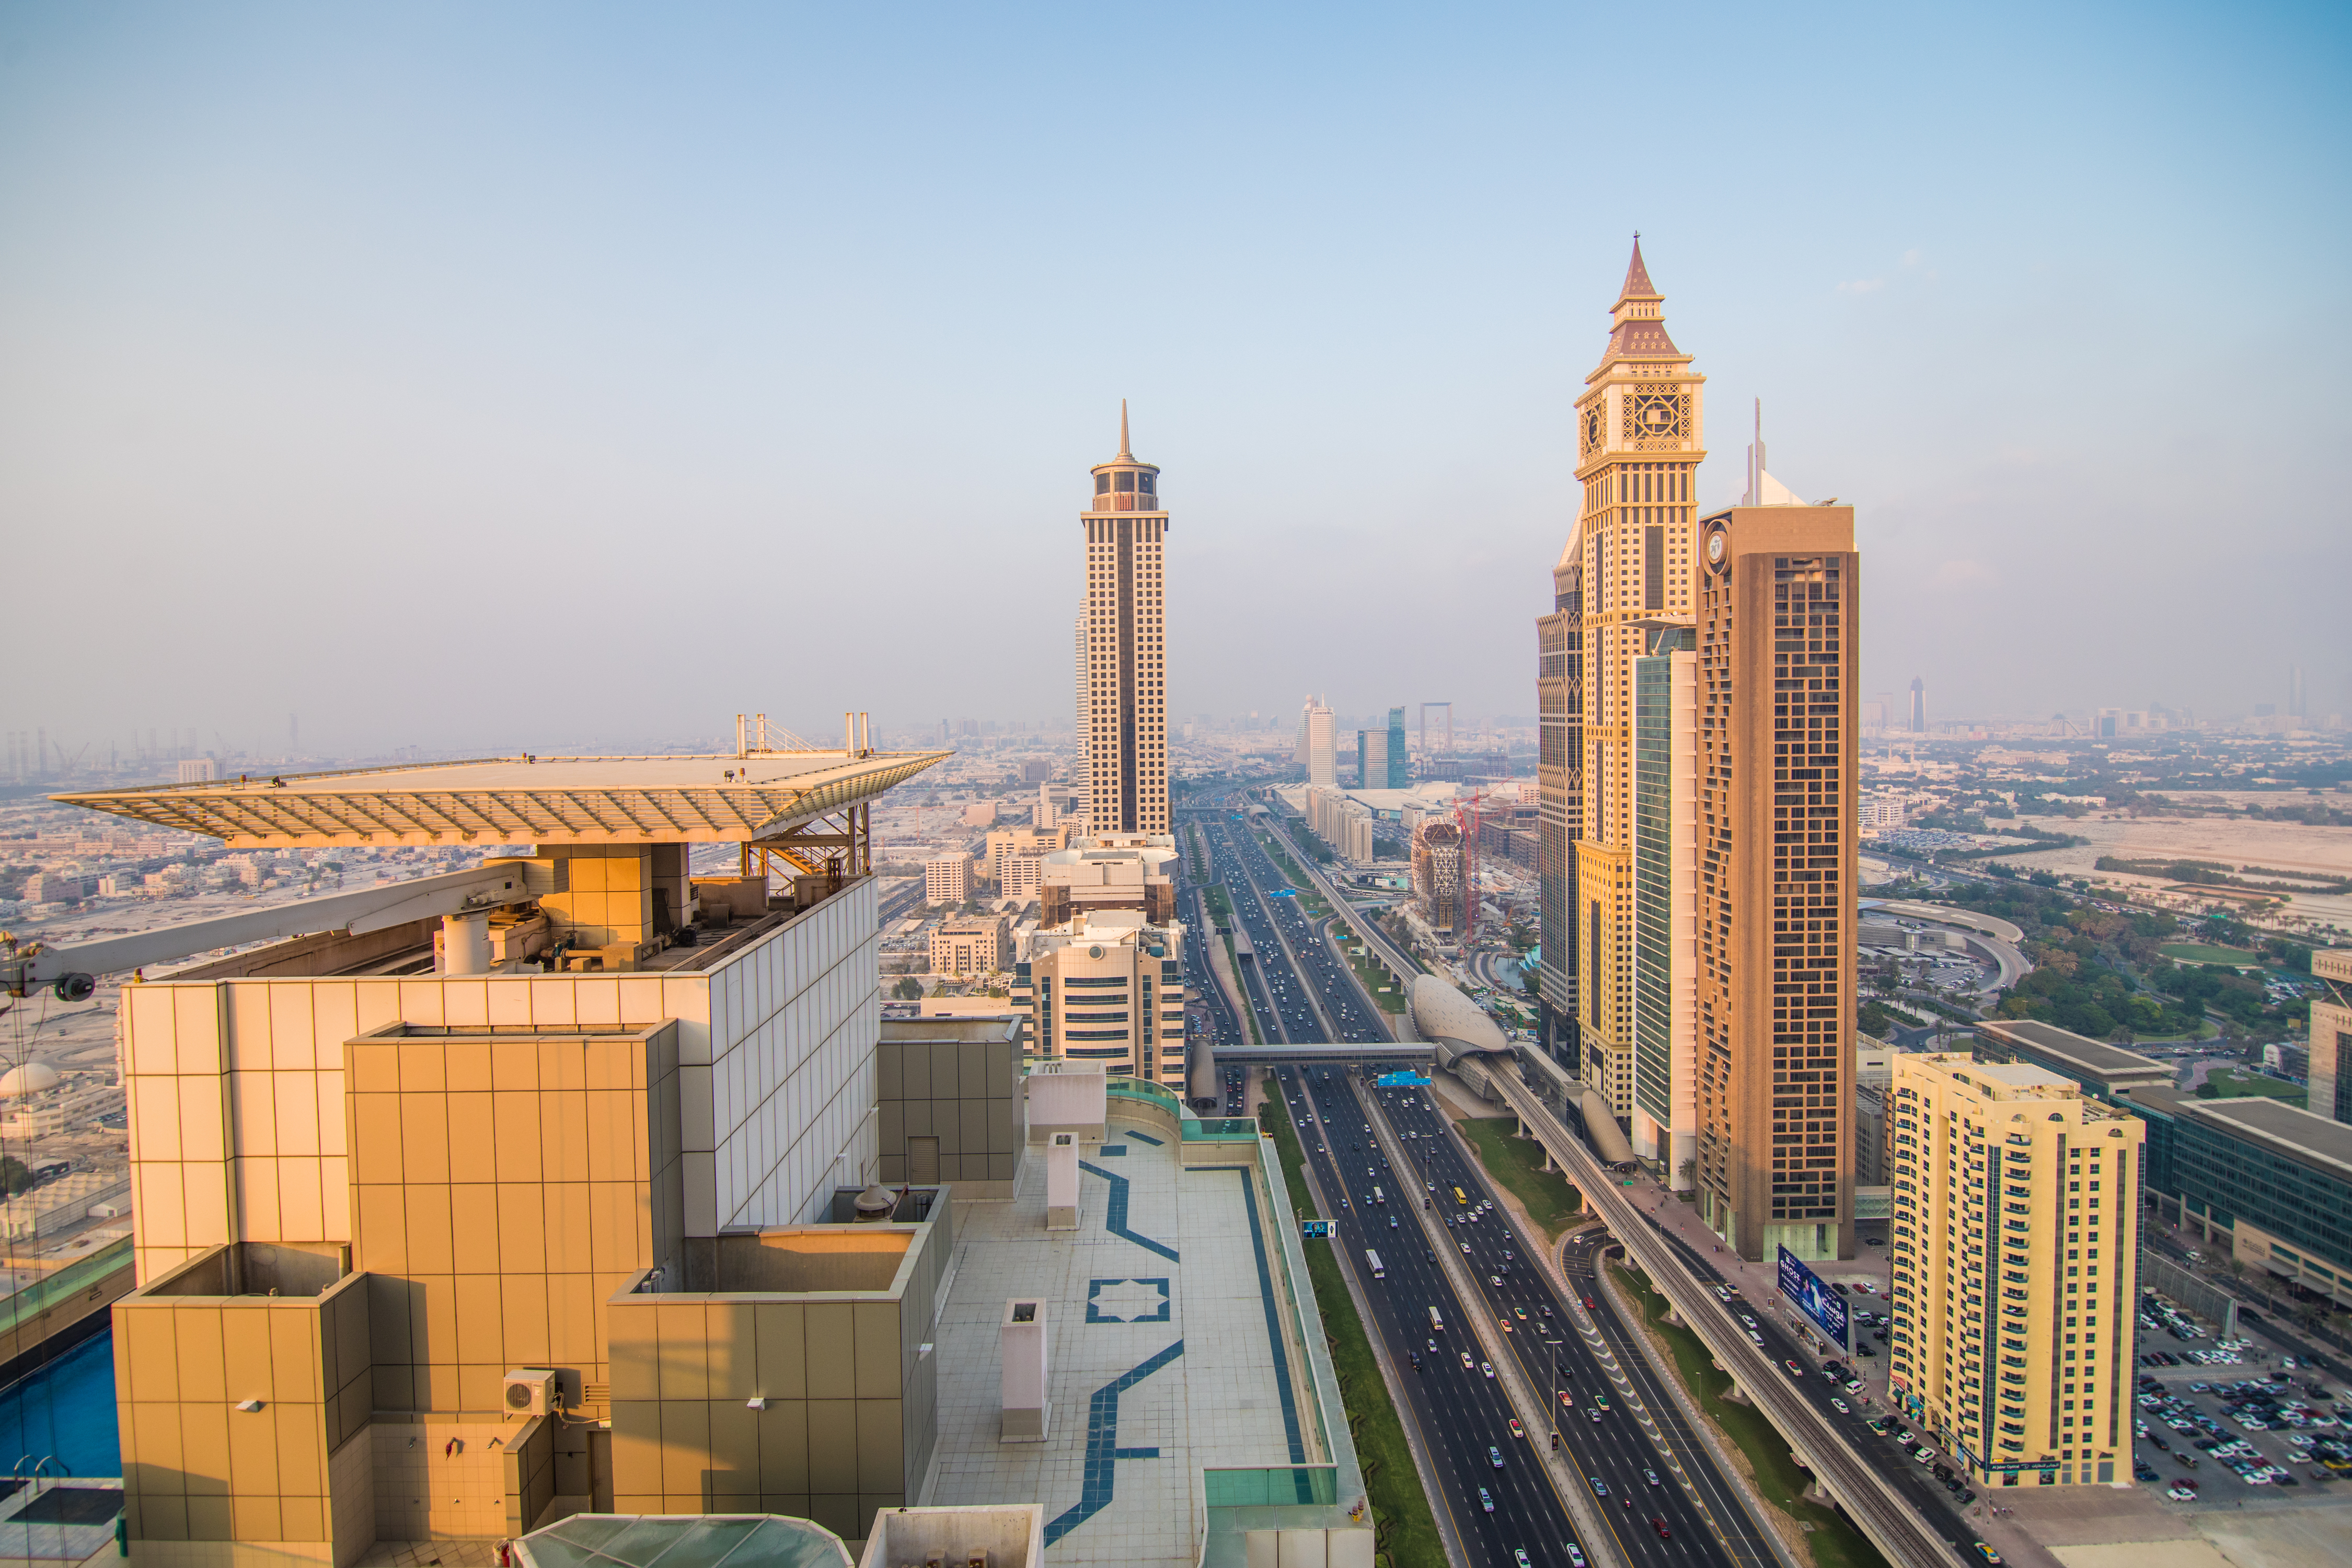 Is it possible to buy or sell property in Dubai?